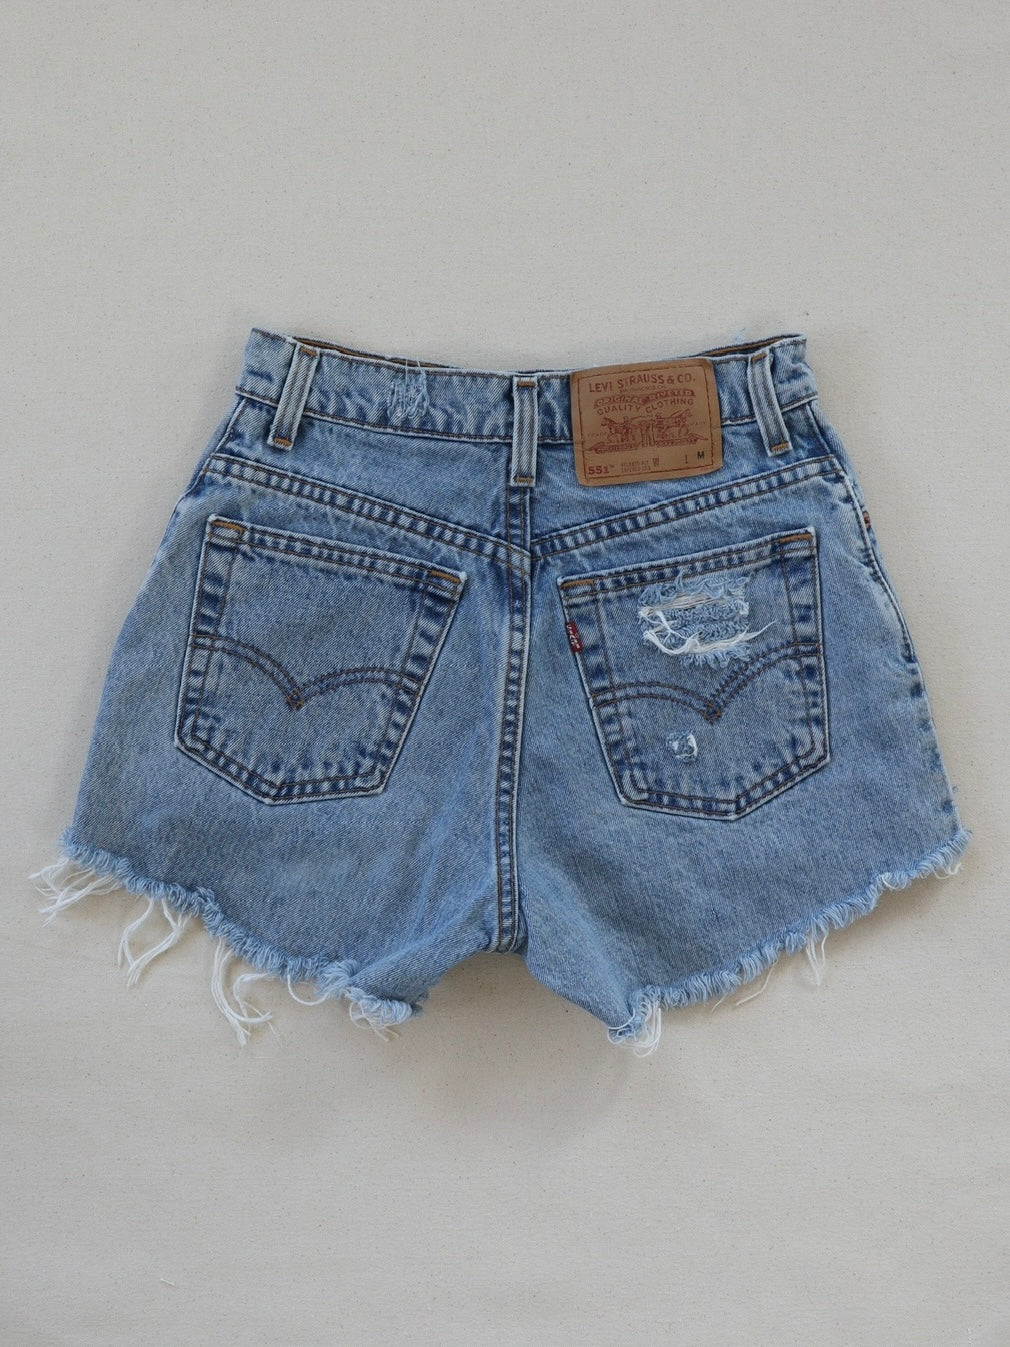 Authentic Vintage Levi's® 551 Shorts Made in the U.S.A  25/'26"